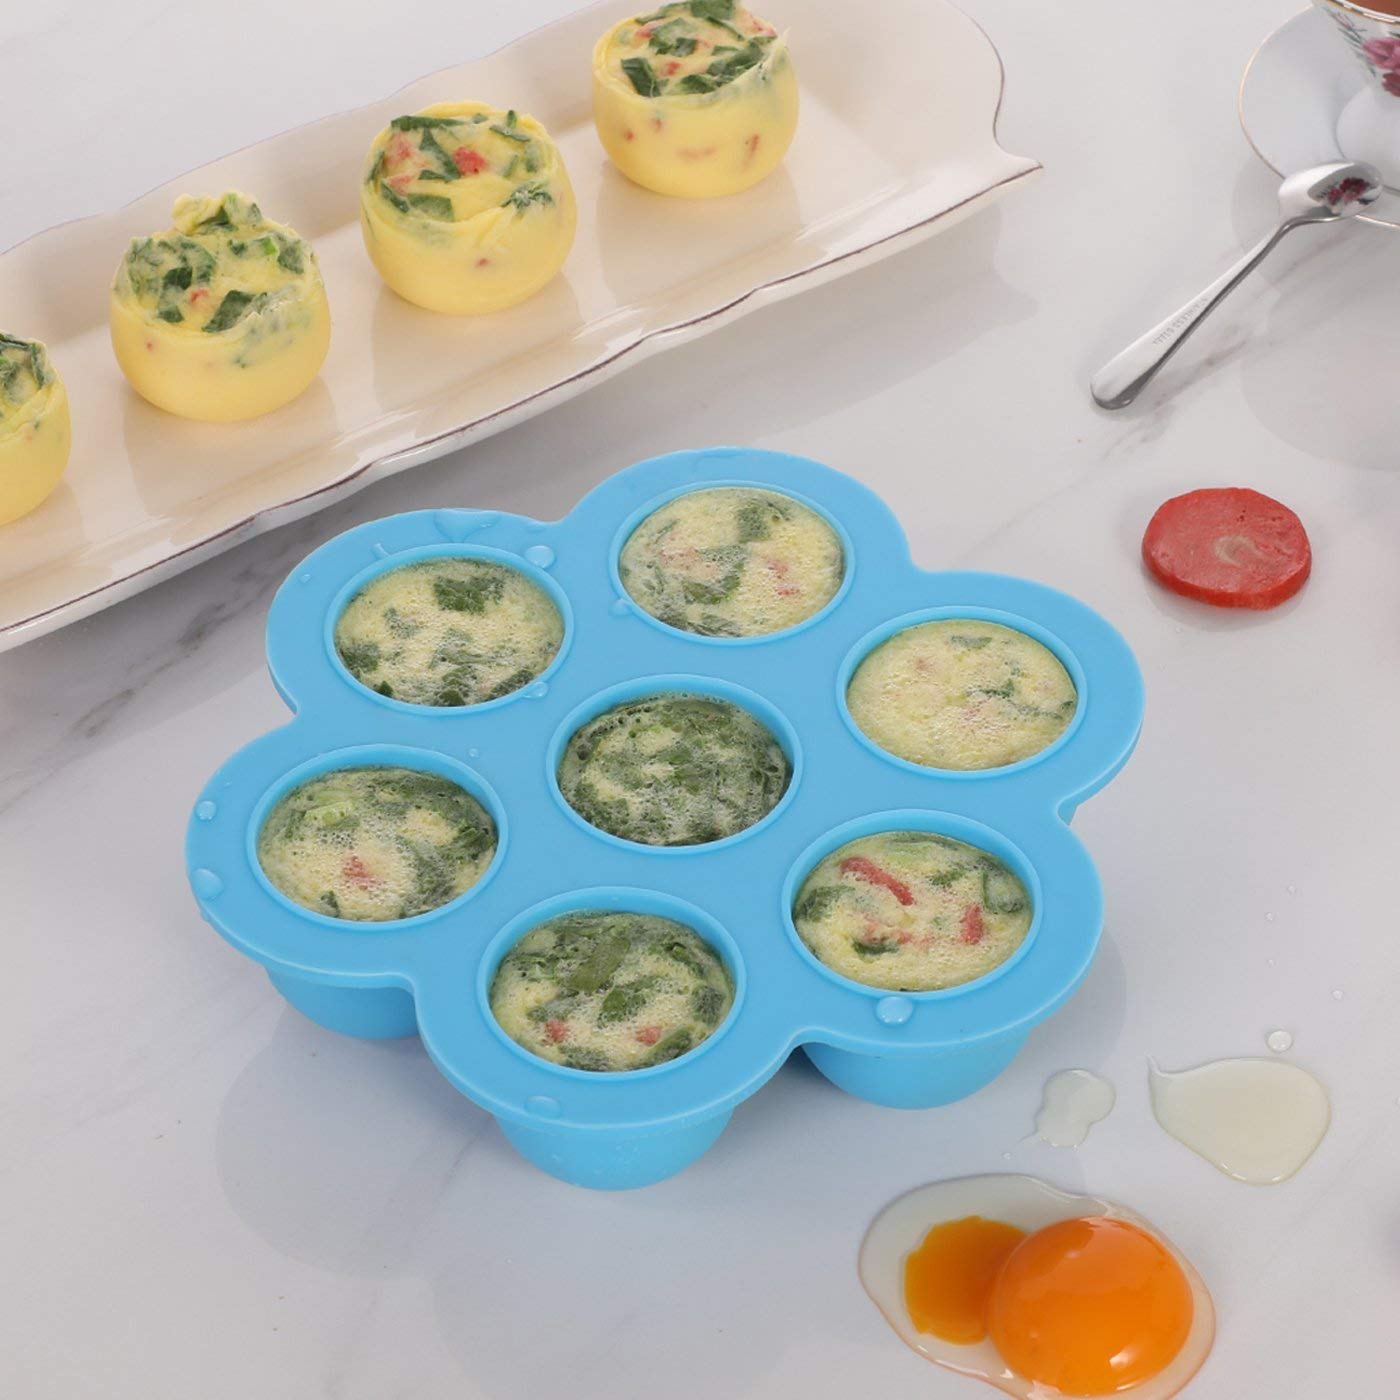 AOZITA Silicone Egg Bites Molds for Instant Pot Accessories - Fits Instant Pot 5,6,8 qt Pressure Cooker, Reusable Baby Food Storage Container and Freezer Tray with Lid, Sous Vide Egg Poacher